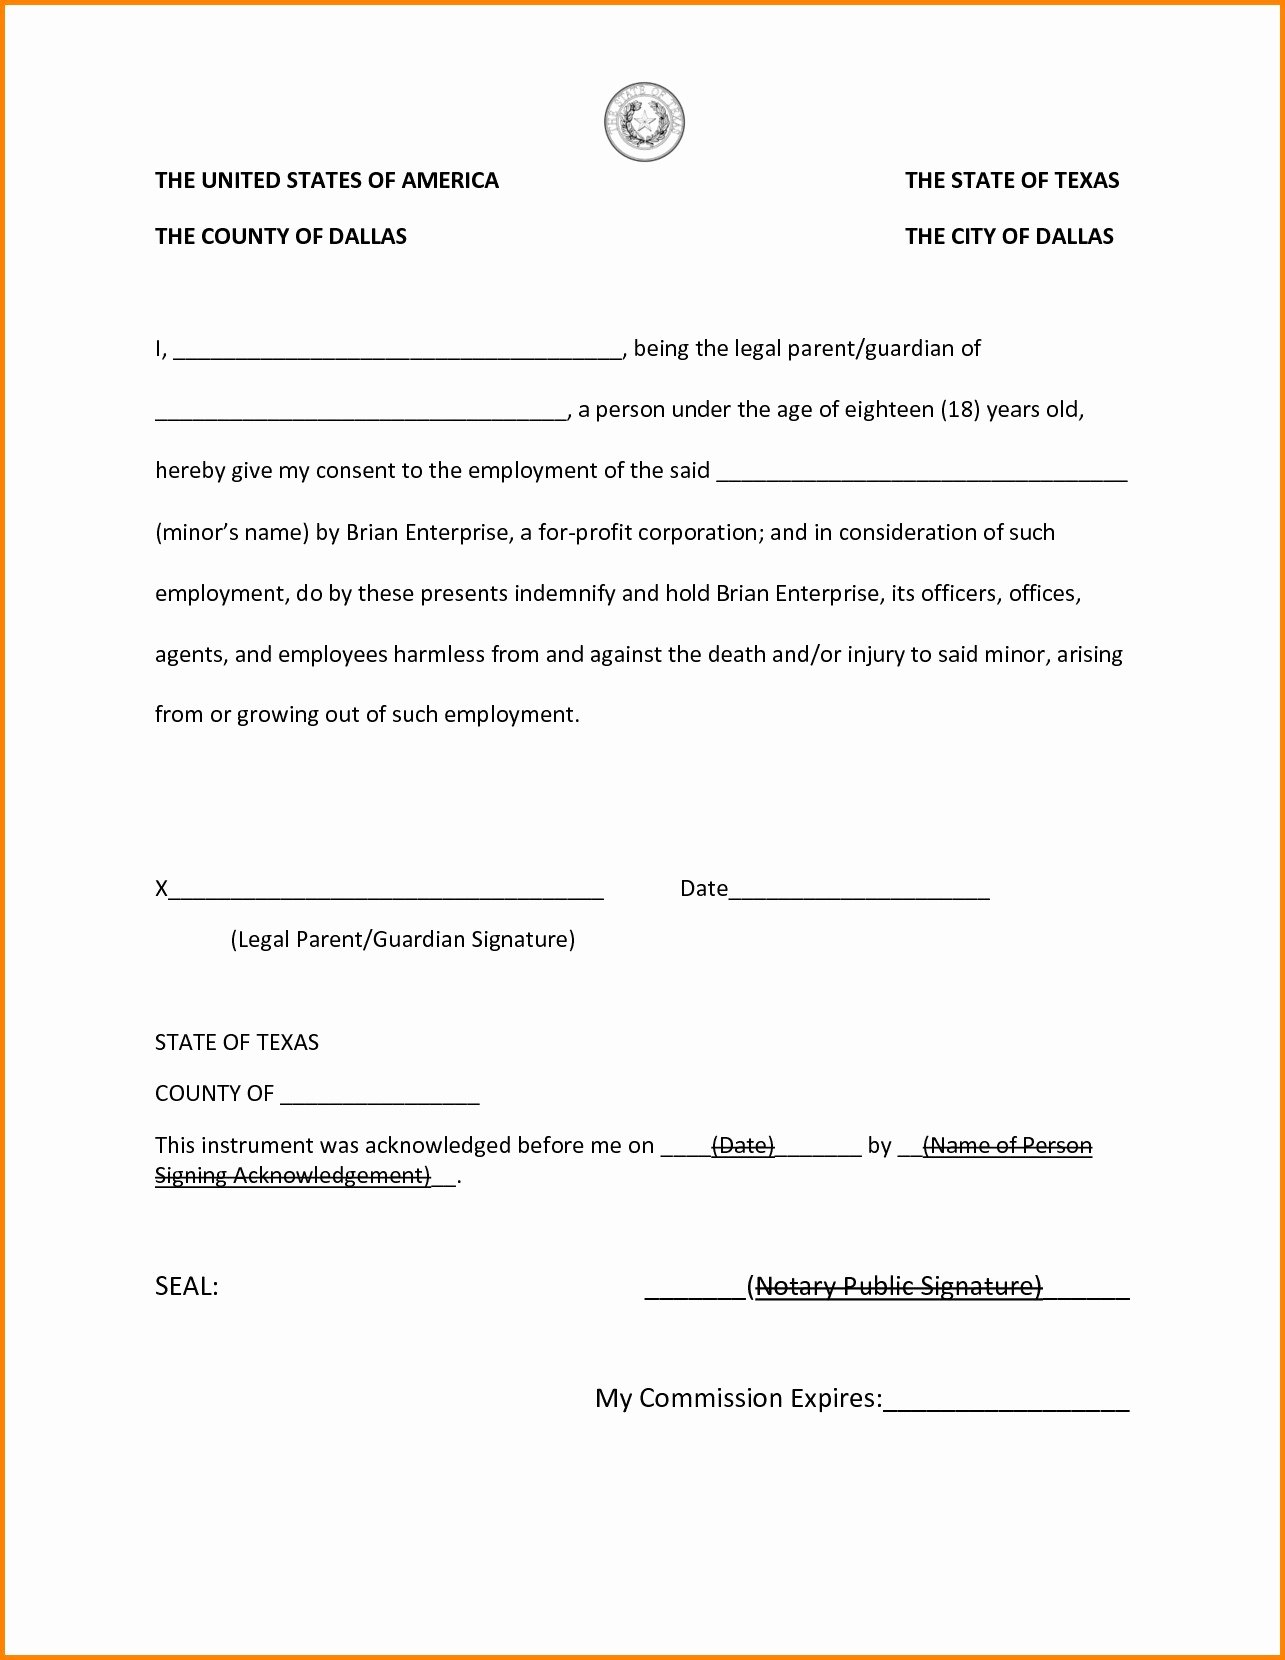 Certificate Of Acknowledgement Template New Notary Acknowledgement form Template B0c50